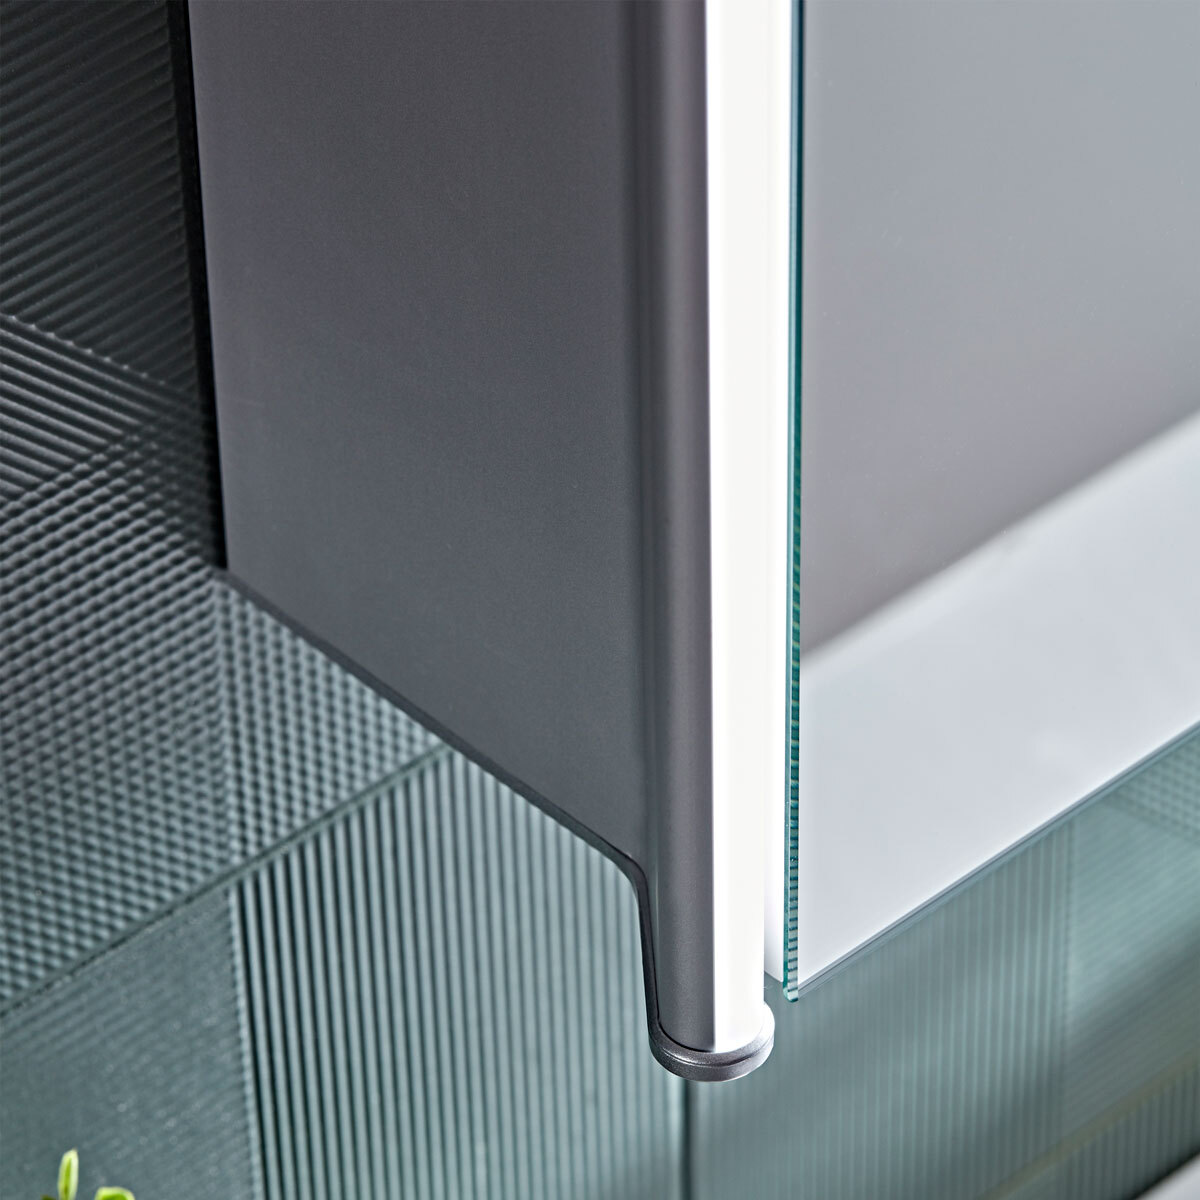 Lifestyle image of close up of edge of the cabinet